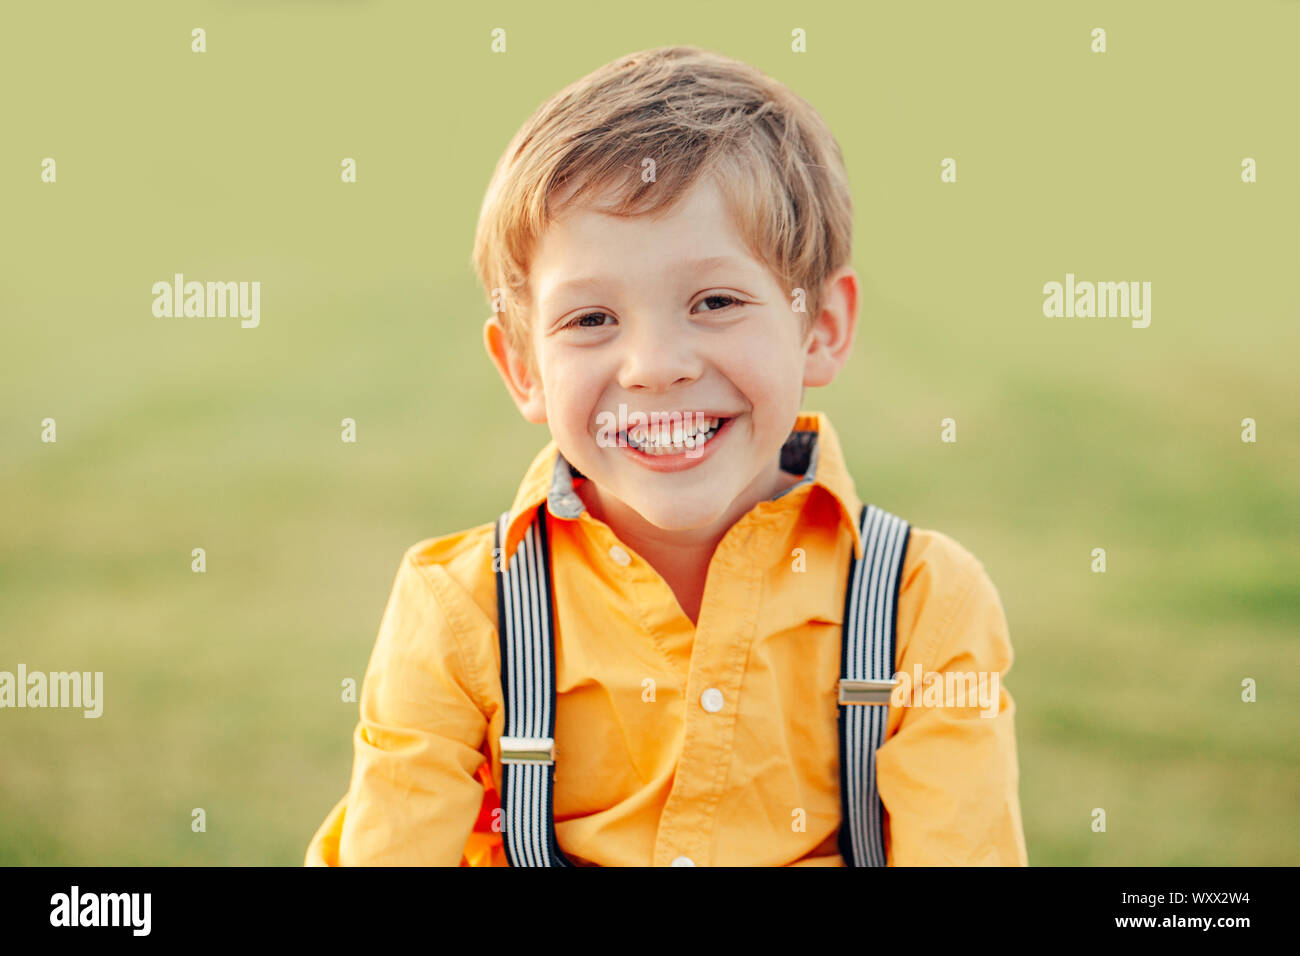 Closeup portrait of funny cute adorable nice smiling laughing Caucasian preschool boy looking in camera against light green background outdoor Stock Photo